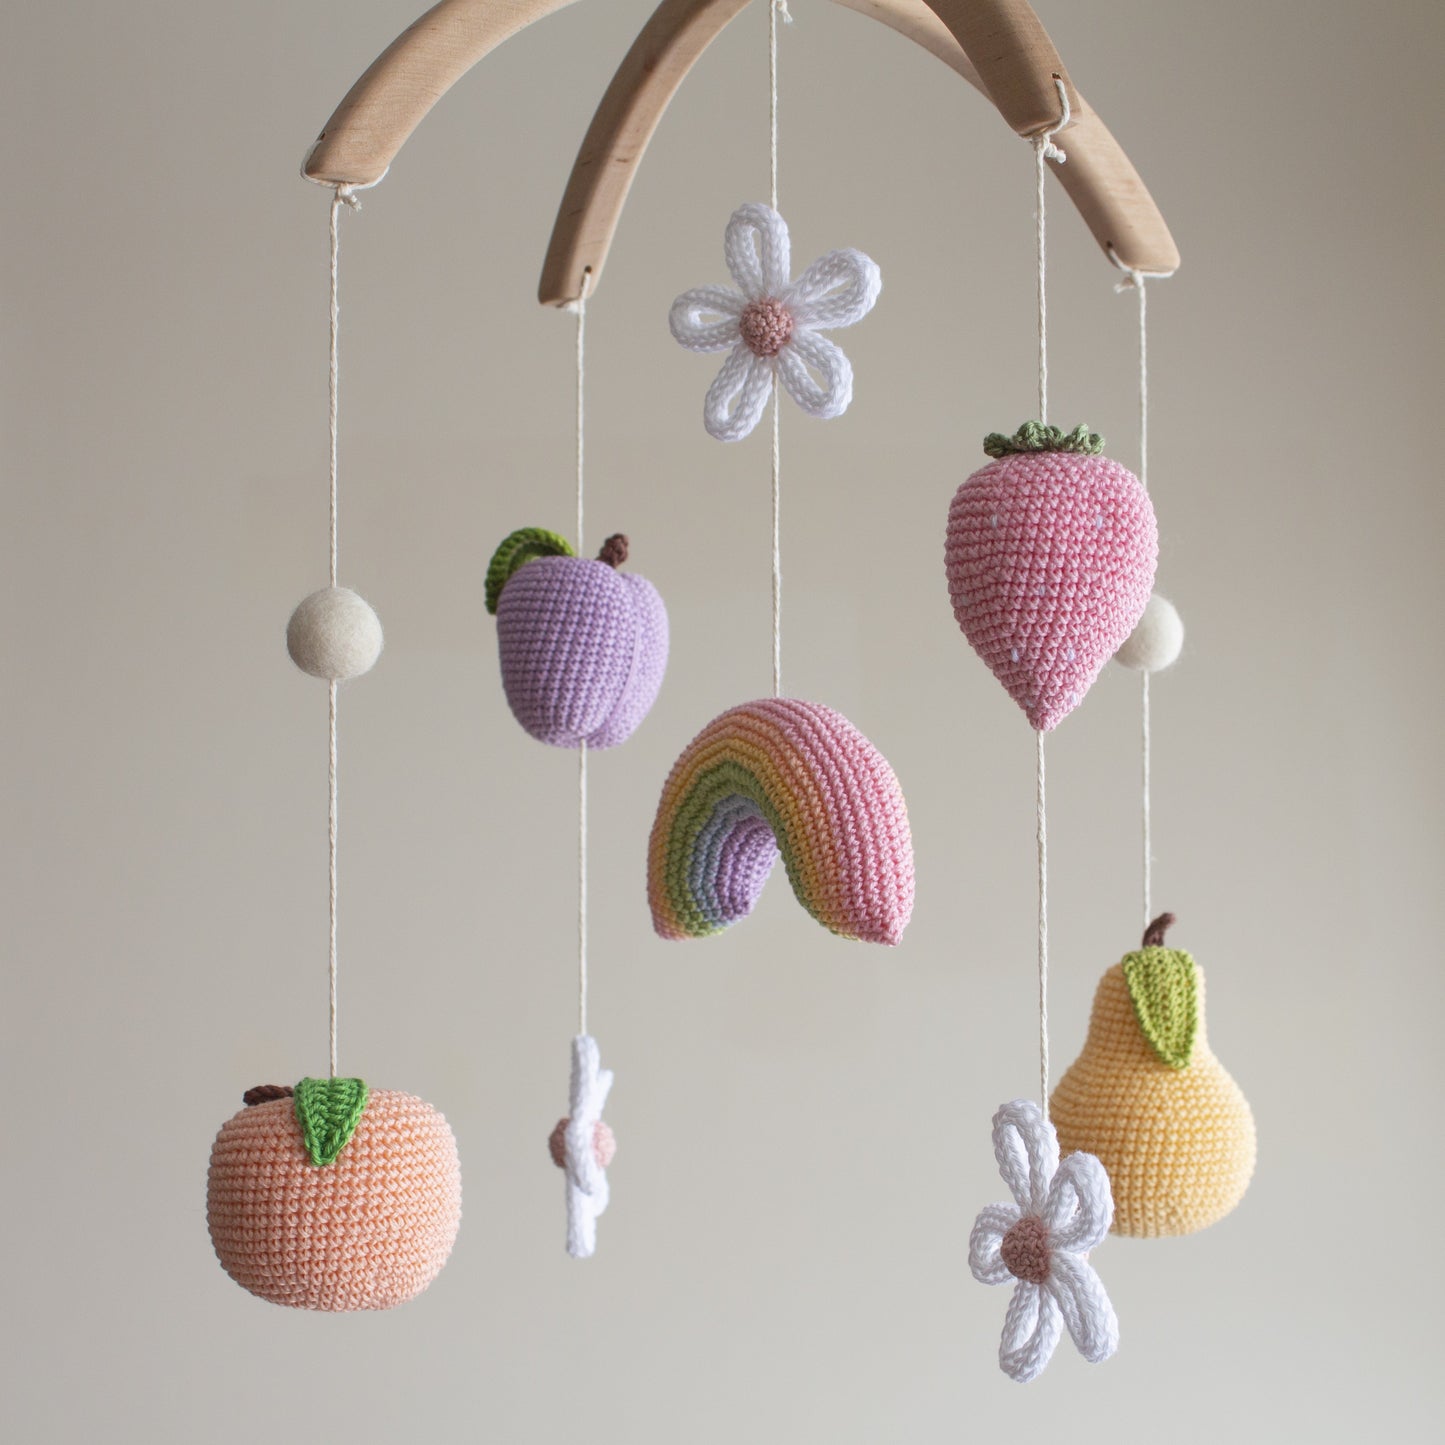 Pastel fruits with flowers and rainbow nursery mobile